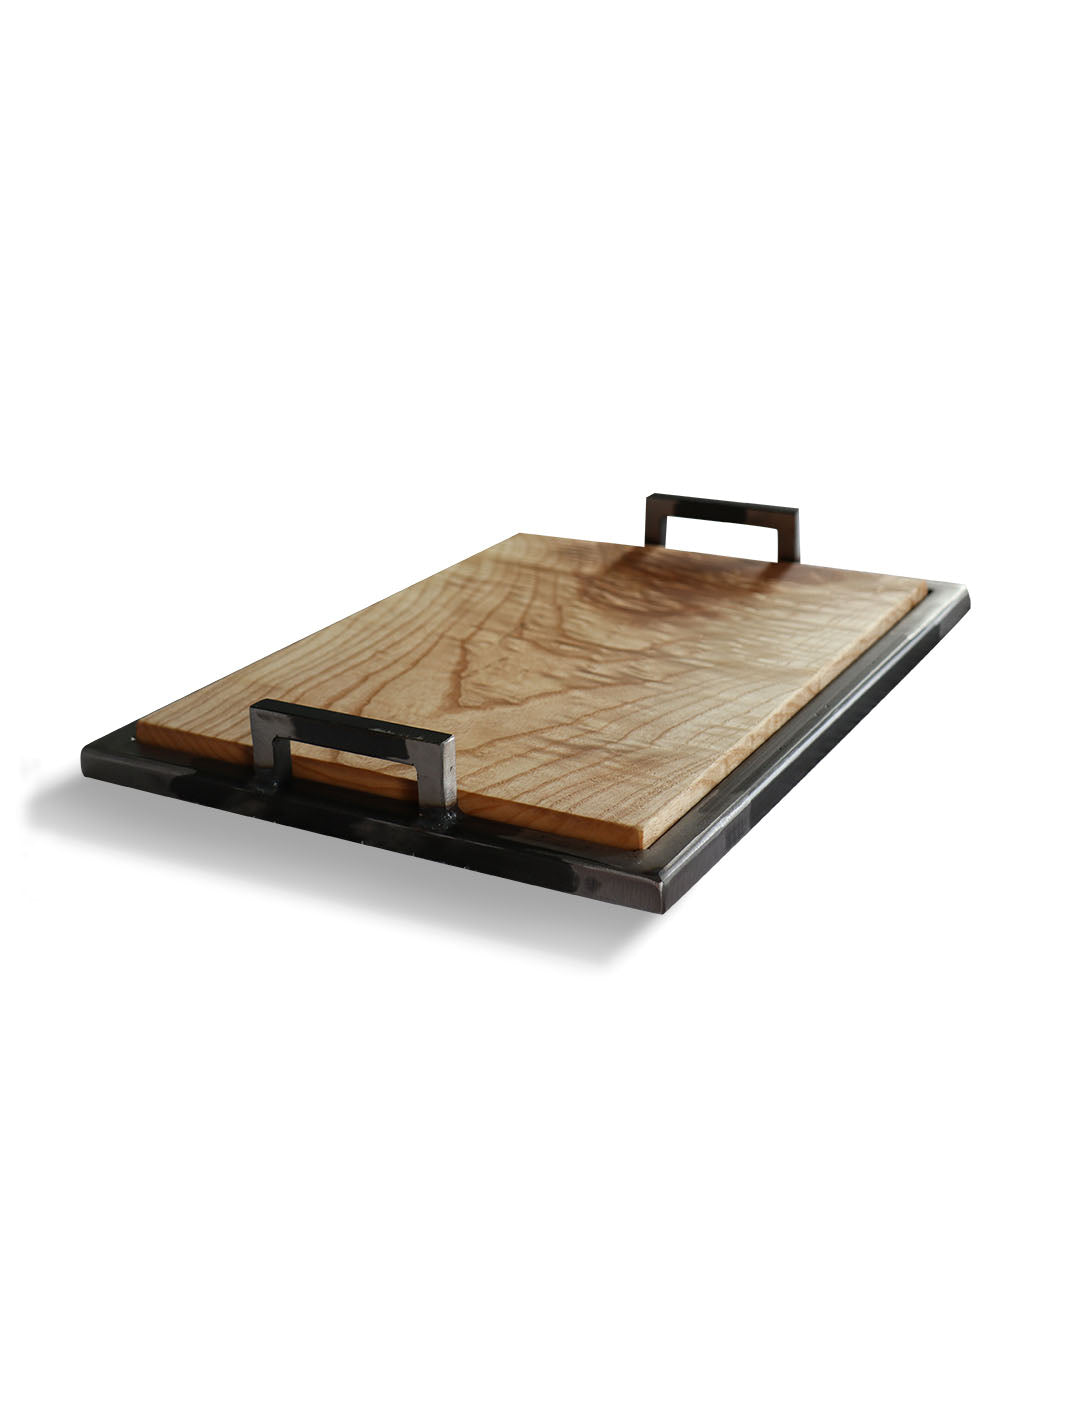 Ash Wood & Metal Bedroom or Bathroom Serving Tray with Handles Earthly Comfort Serving Tray 1560